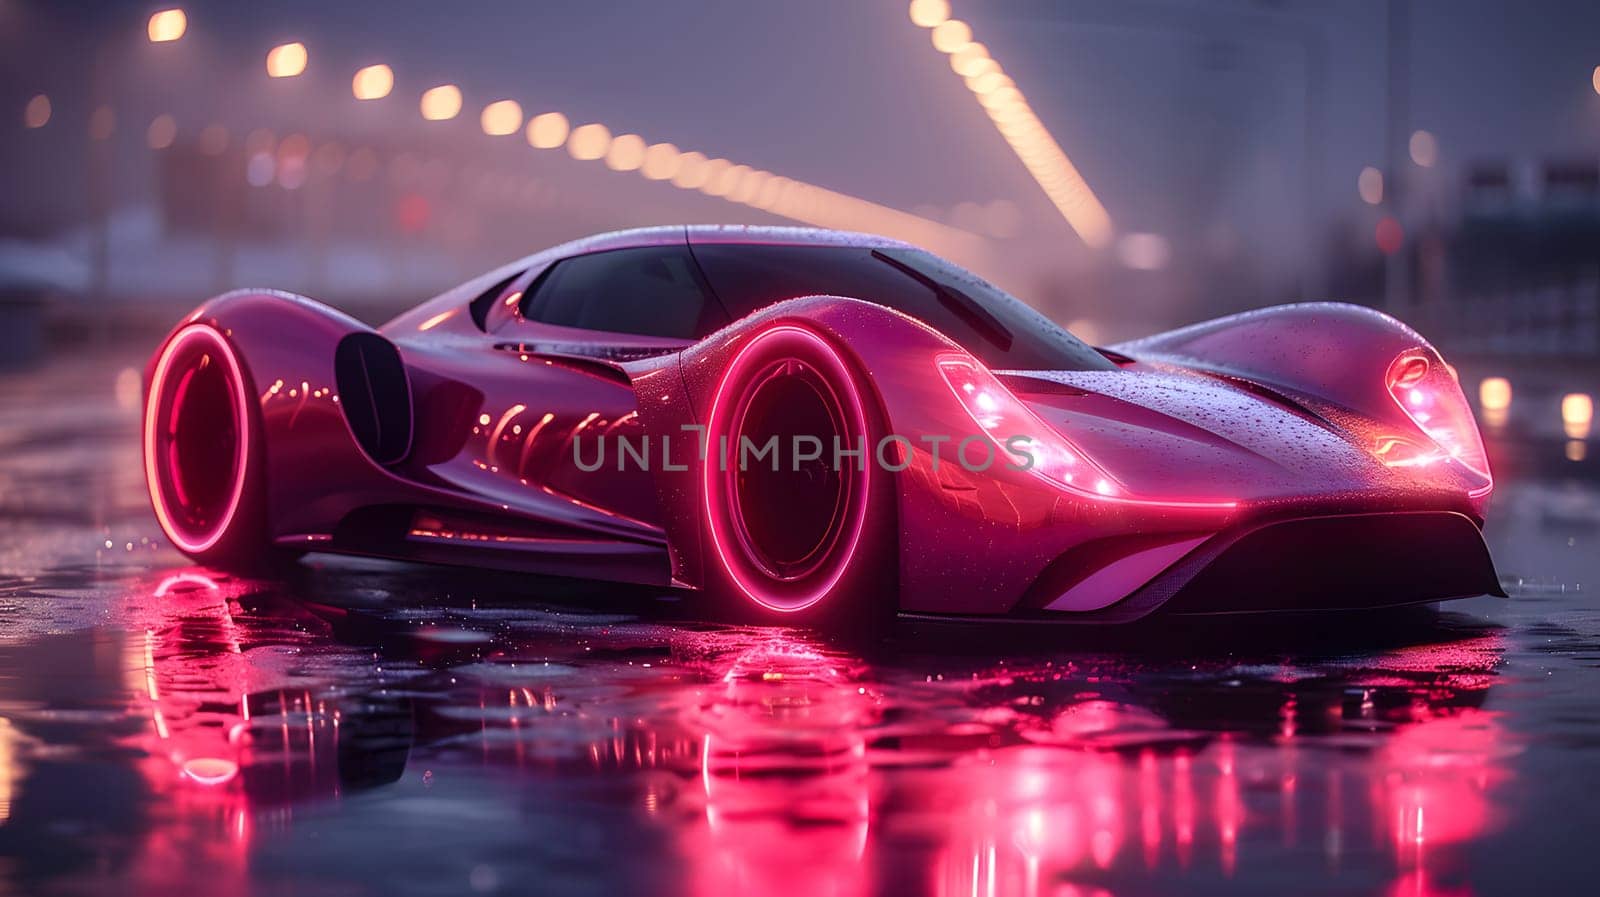 Vehicle with magenta automotive lighting drives on wet road at night by Nadtochiy